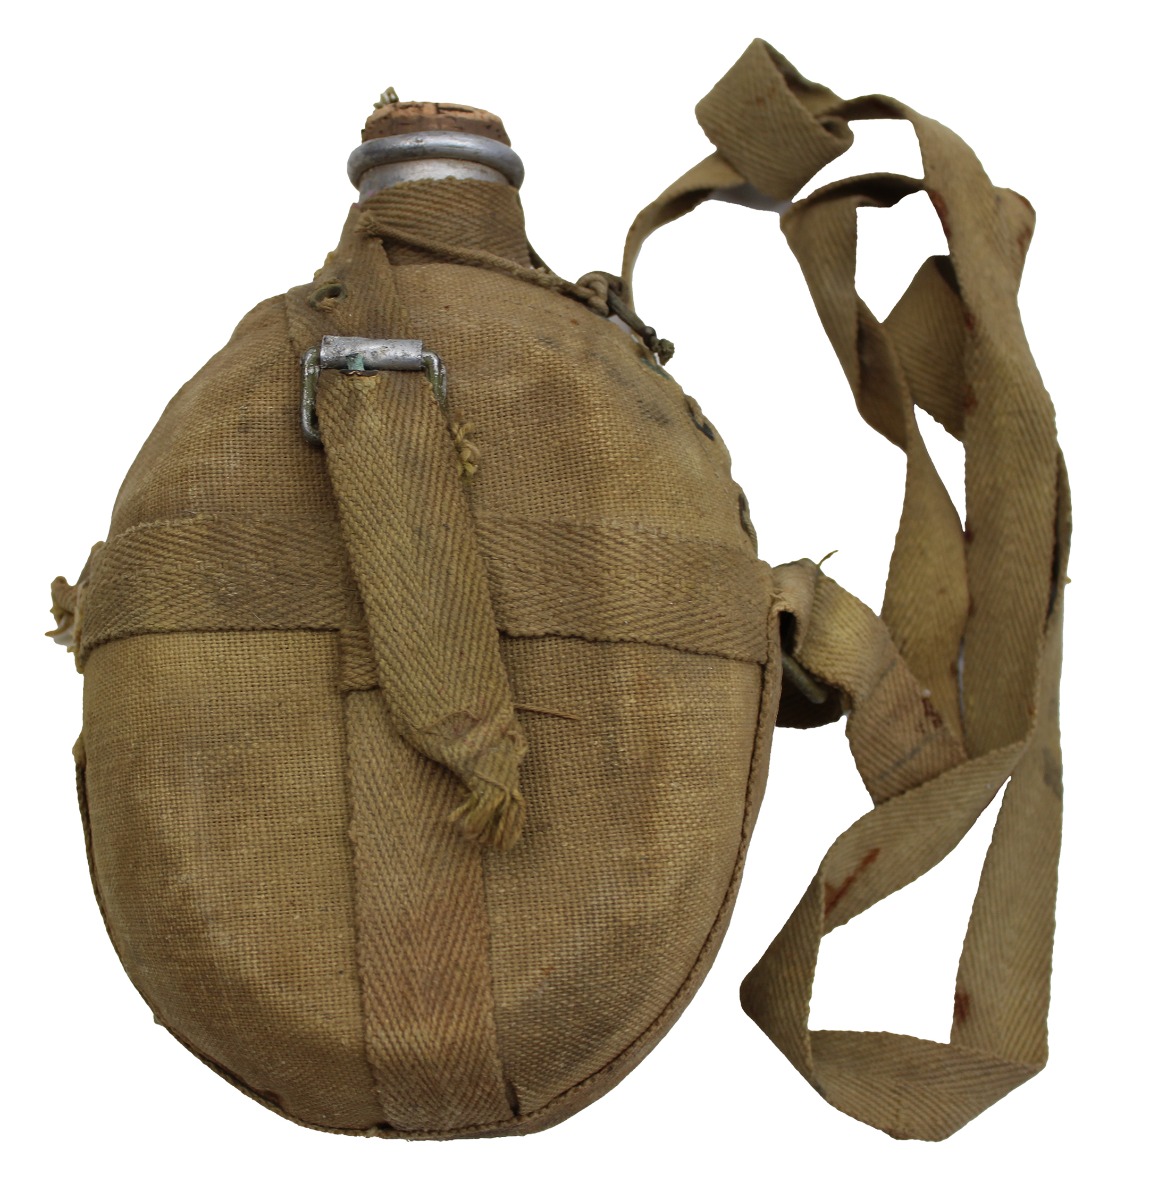 Japanese WW2 Aluminum canteen Water Bottle with canvas cover and strap